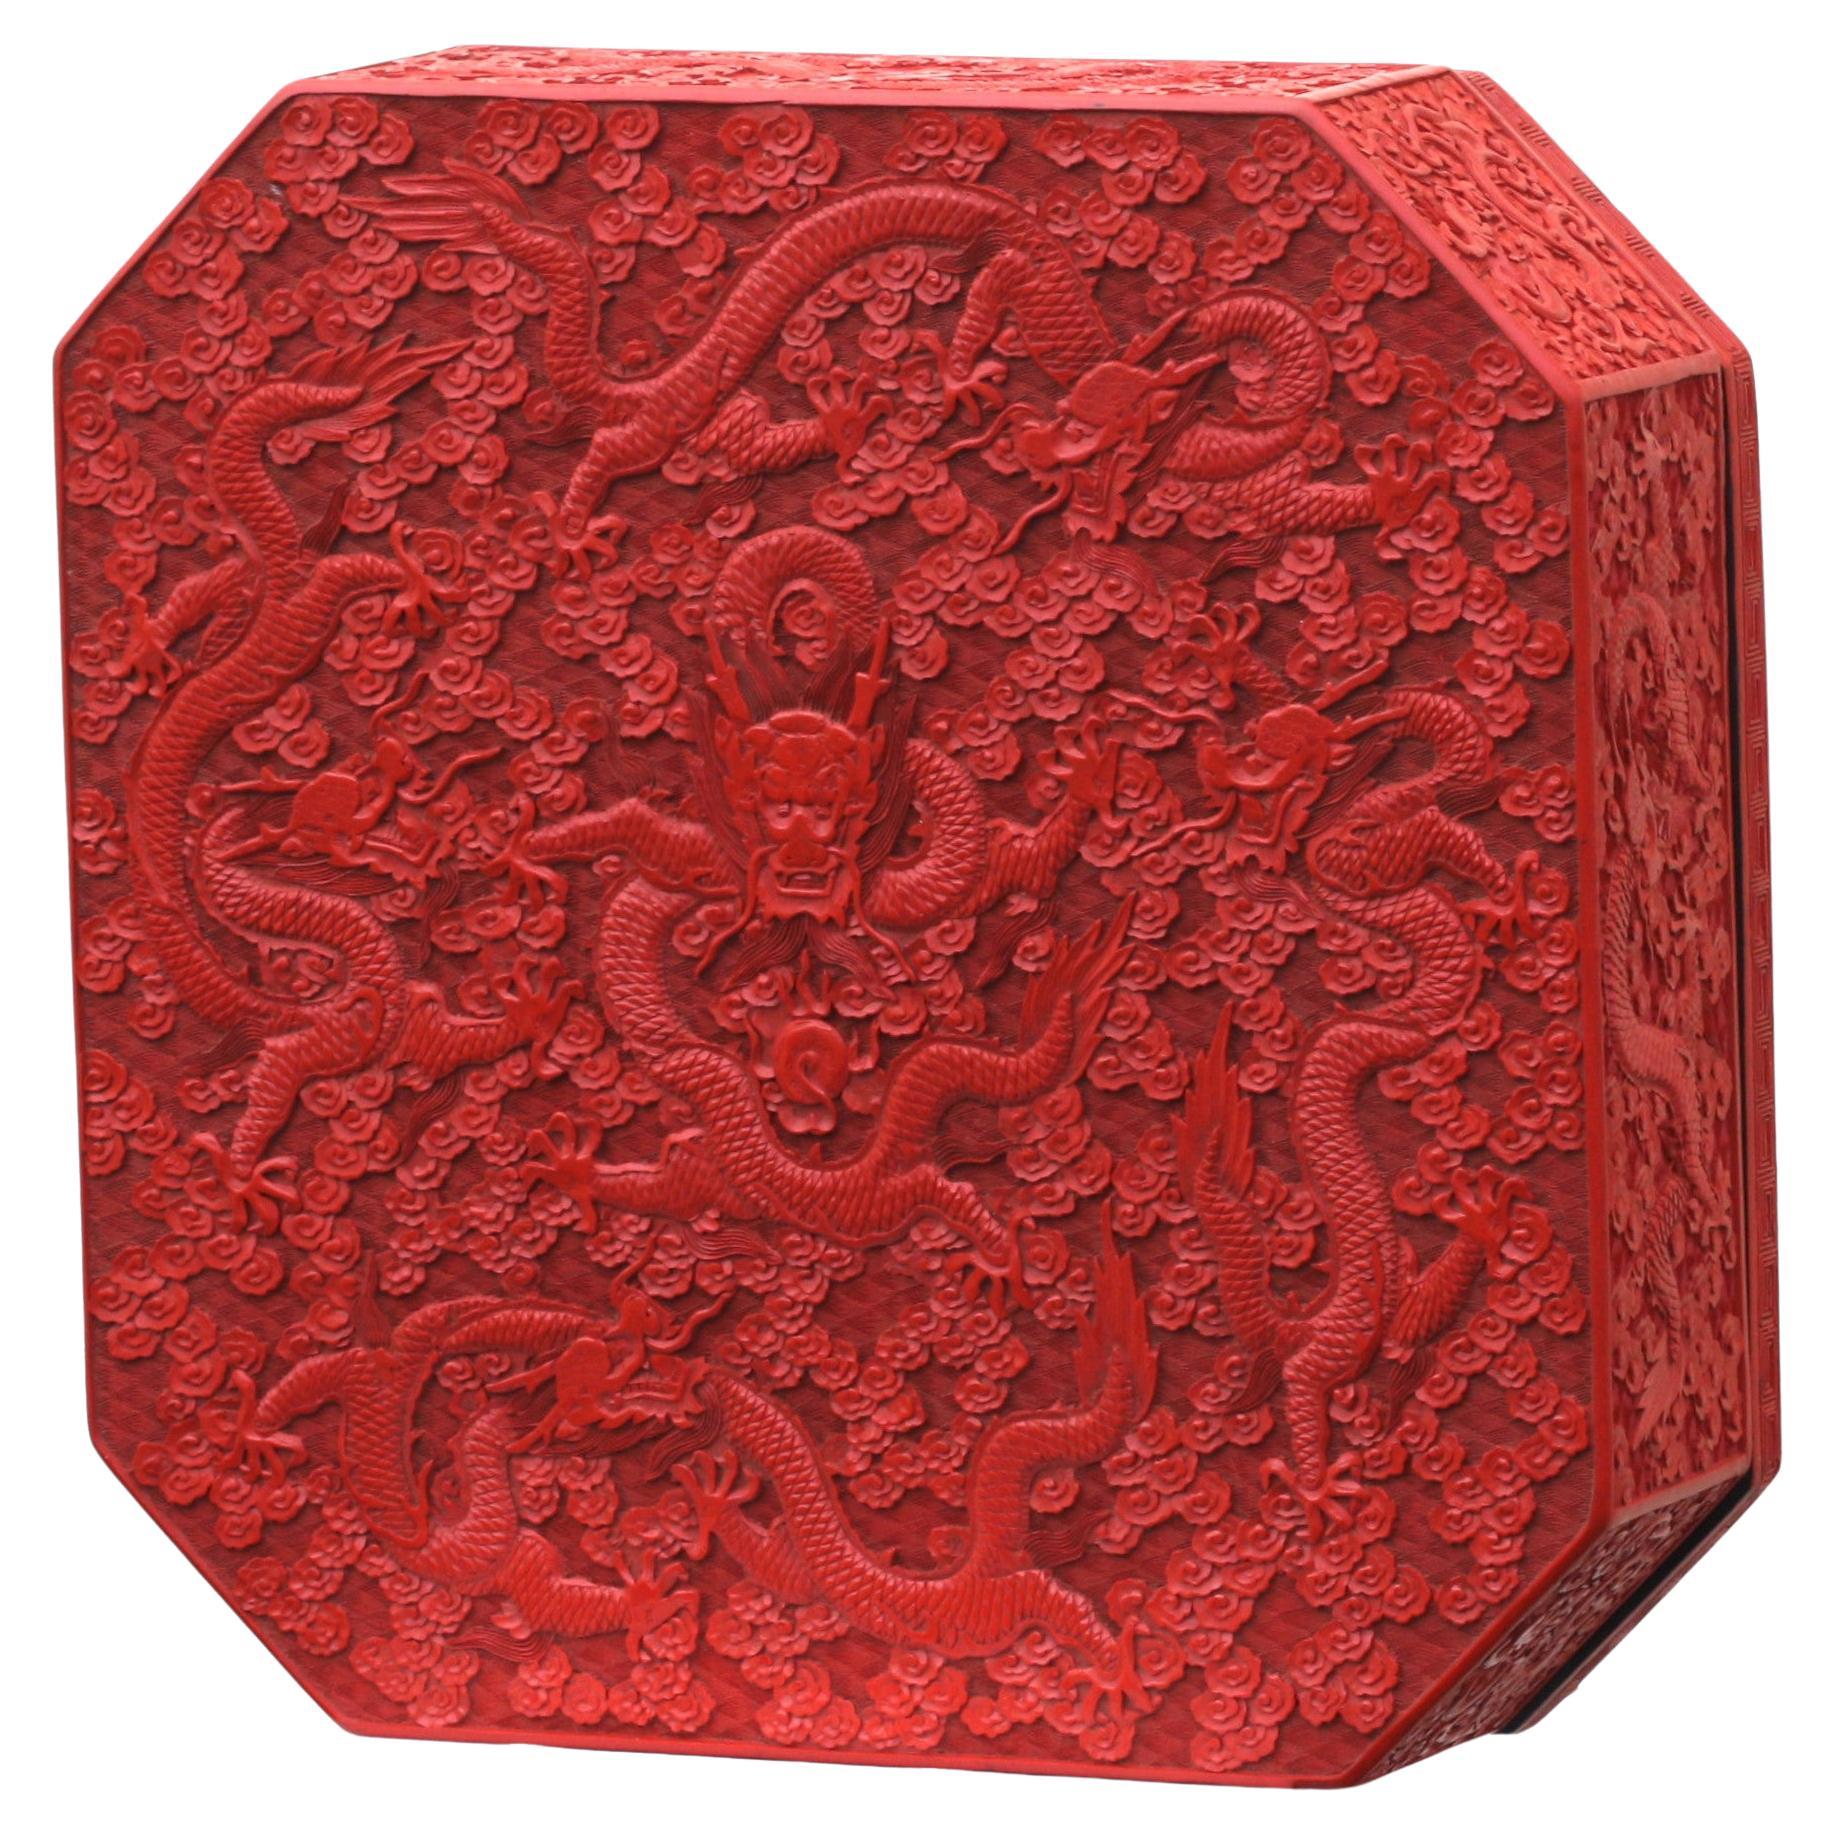 Large and Impressive Chinese Cinnabar Lacquer "Dragon" Box and Cover